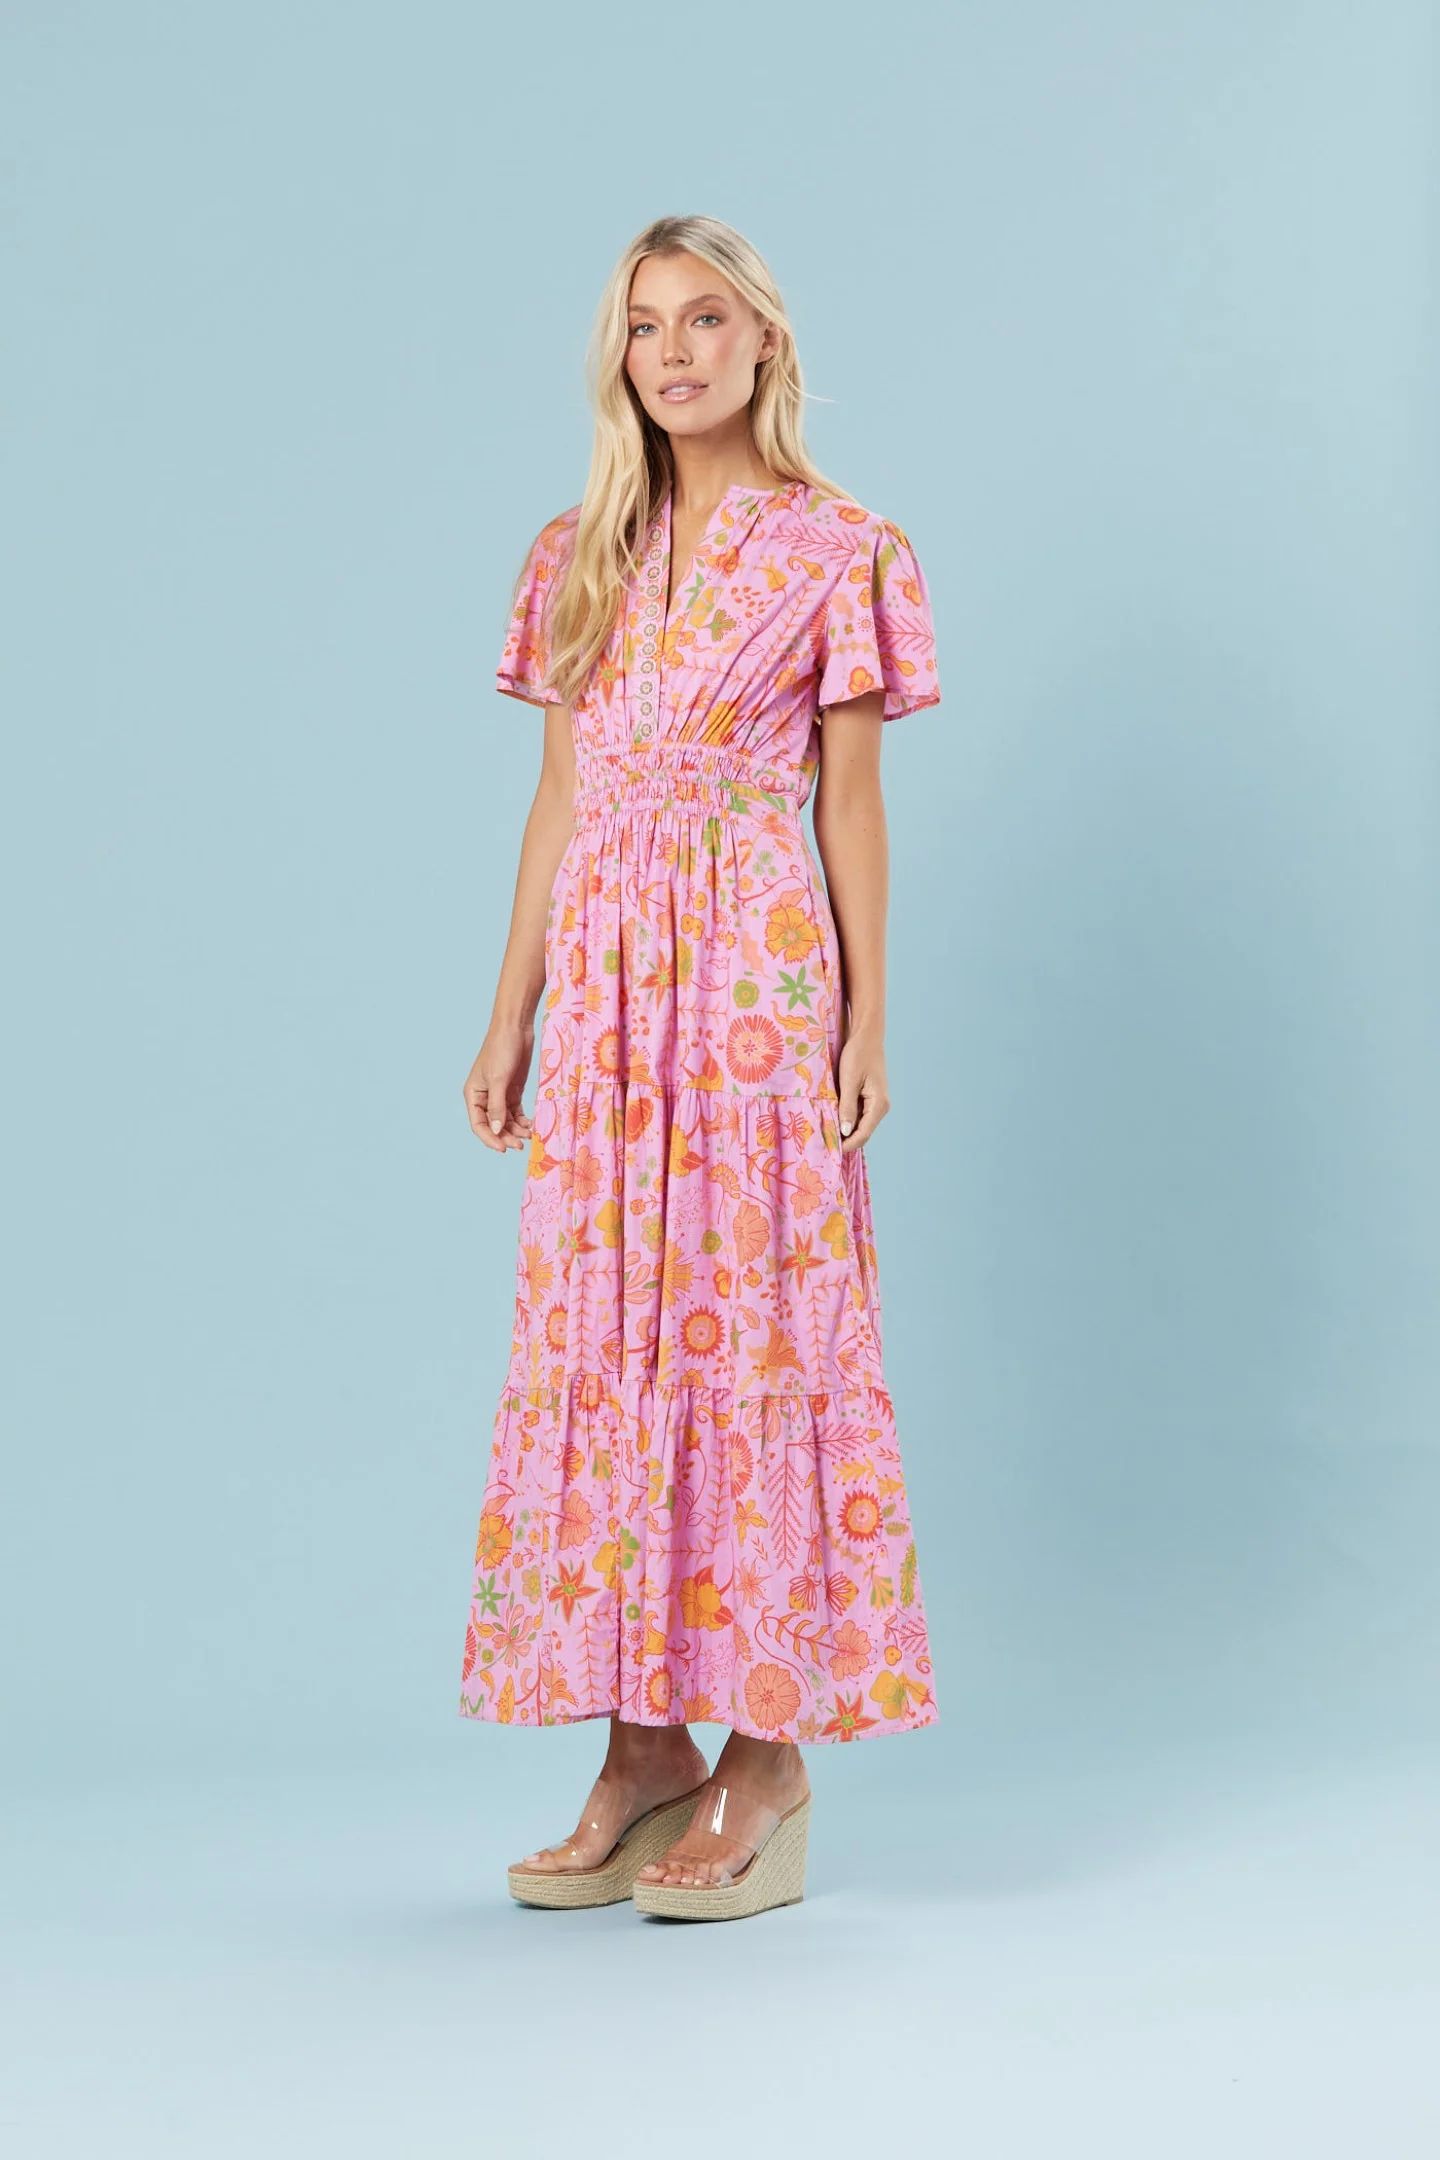 Eloise Dress in Pink Floral | Sheridan French